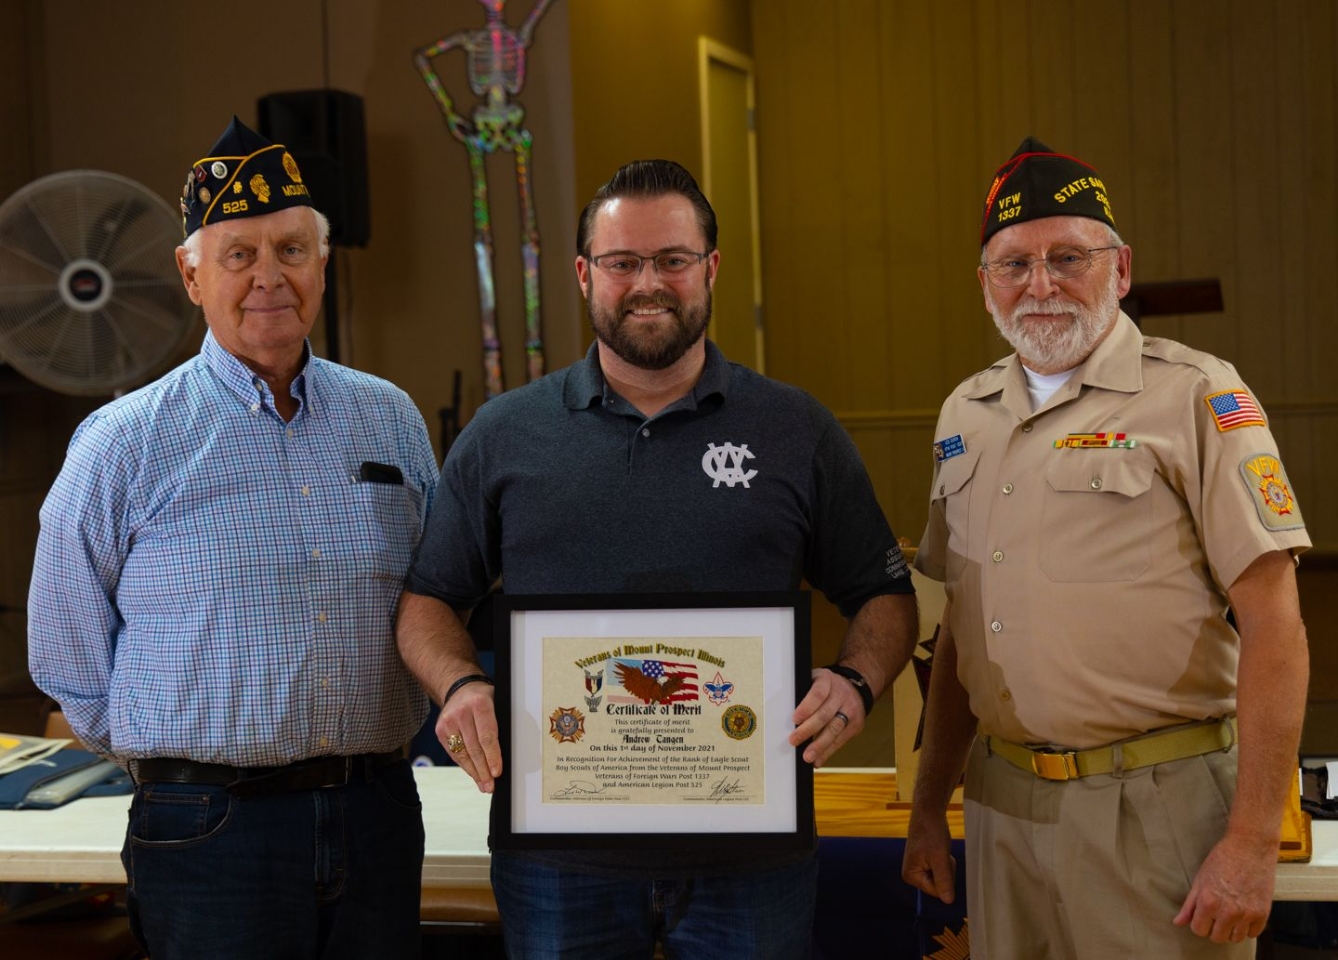 many years late Andrew Tangen VACLC gets recognition for his eagle scout award from post 1337